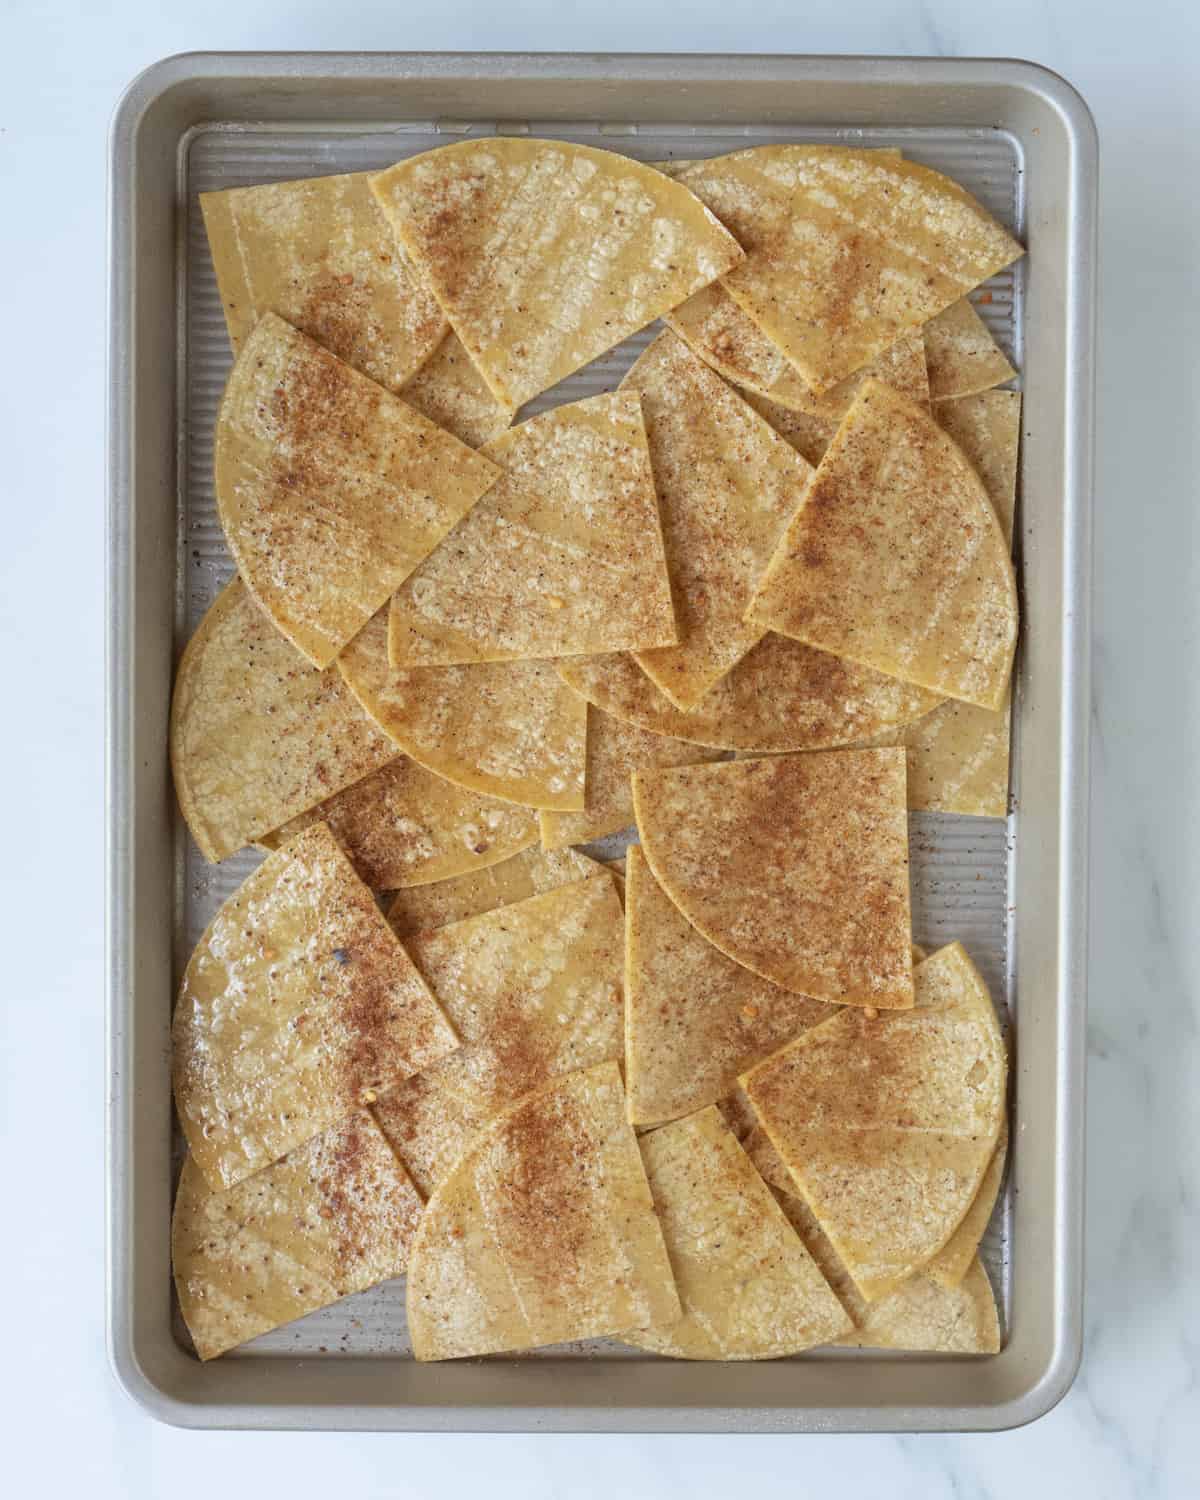 A sheet pan with corn tortillas spread out and cut into quarters seasoned with Dalkin&Co taco seasoning.